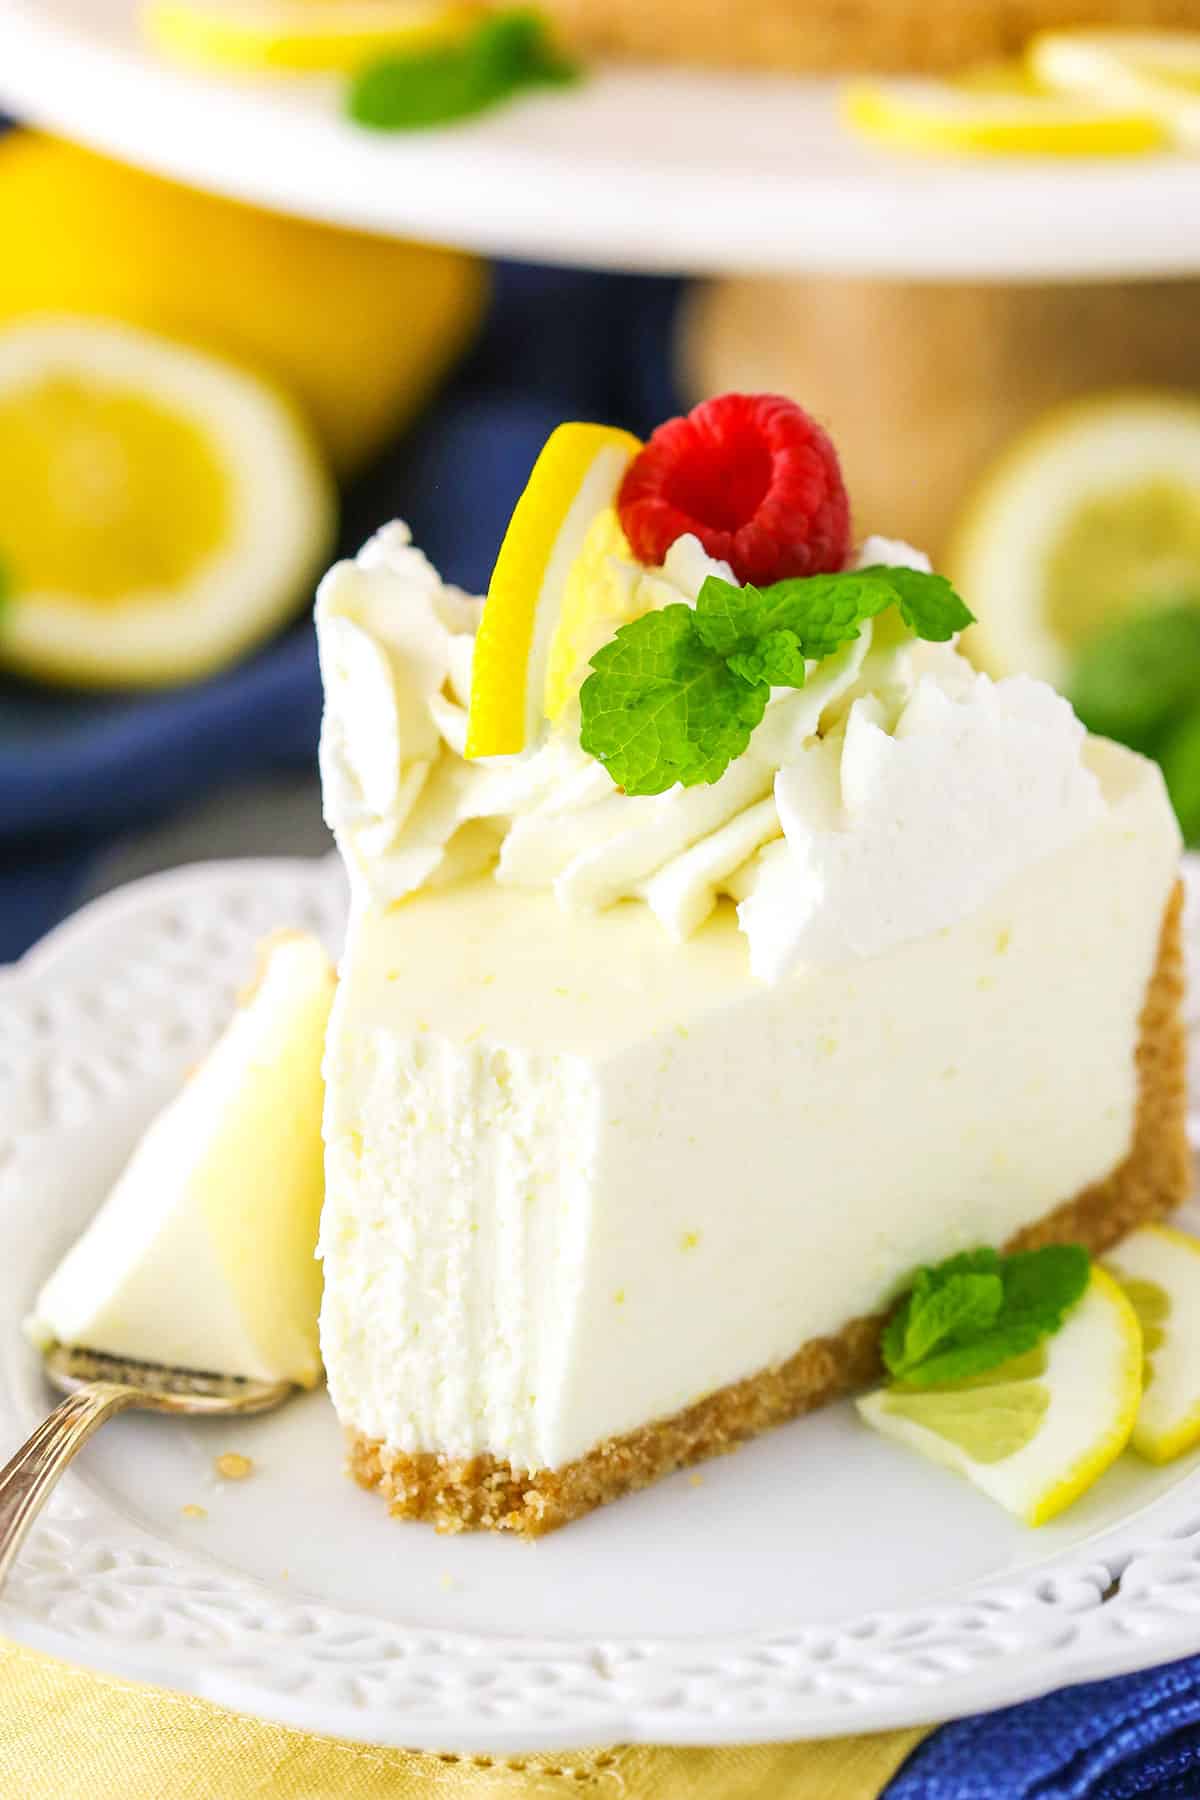 A slice of No Bake Lemon Cheesecake with a bite taken out next to a silver fork on a white plate